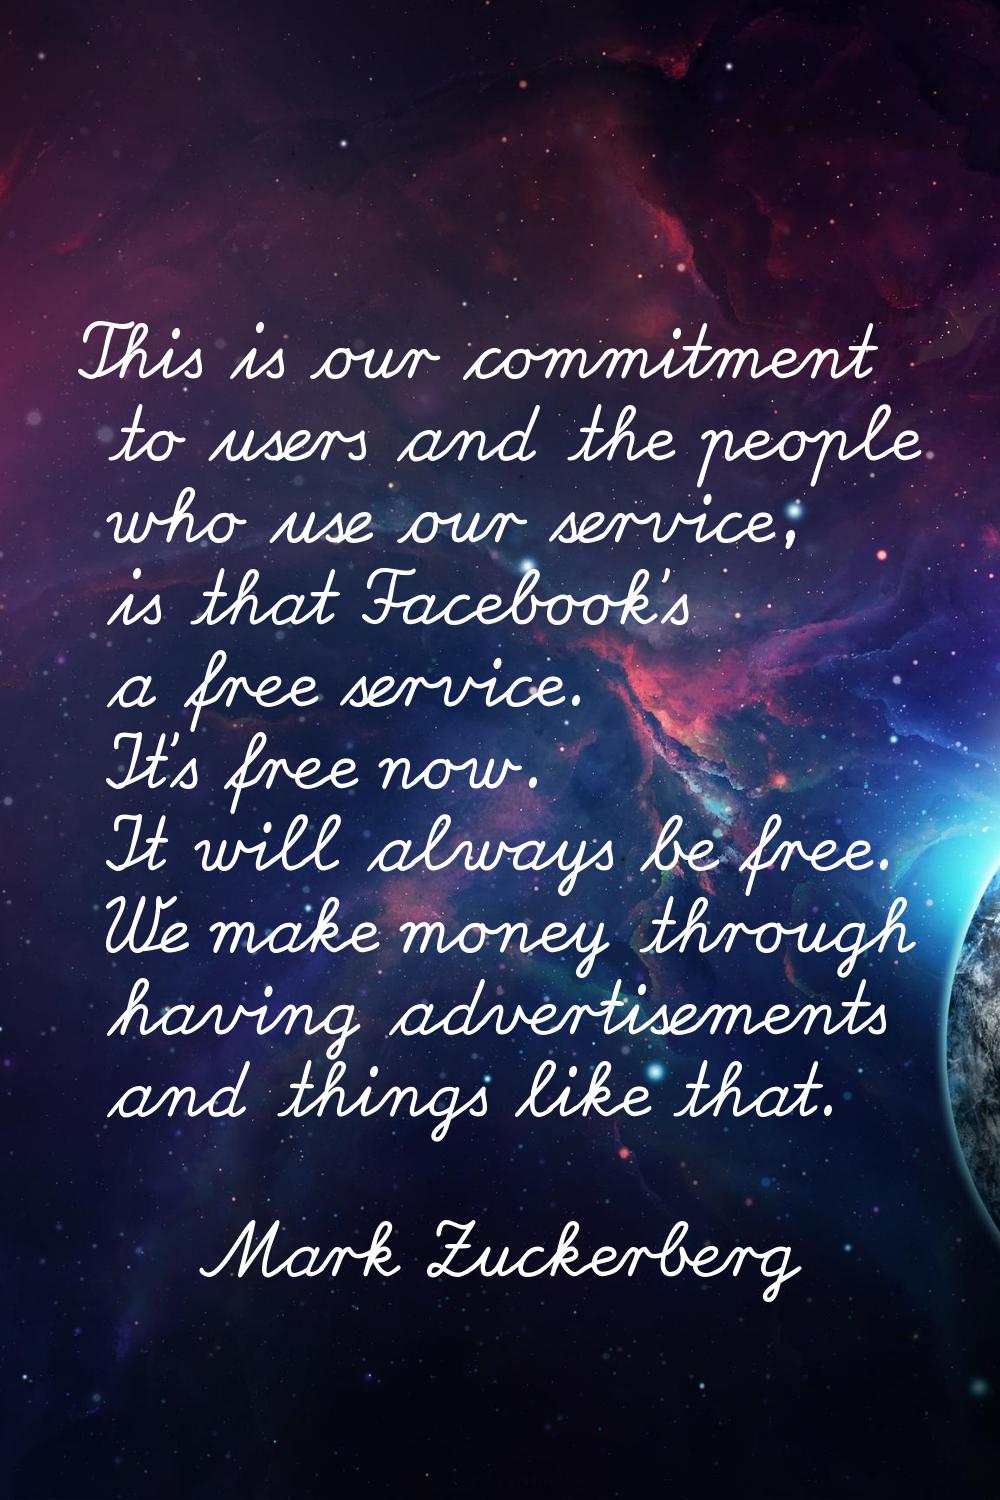 This is our commitment to users and the people who use our service, is that Facebook's a free servi